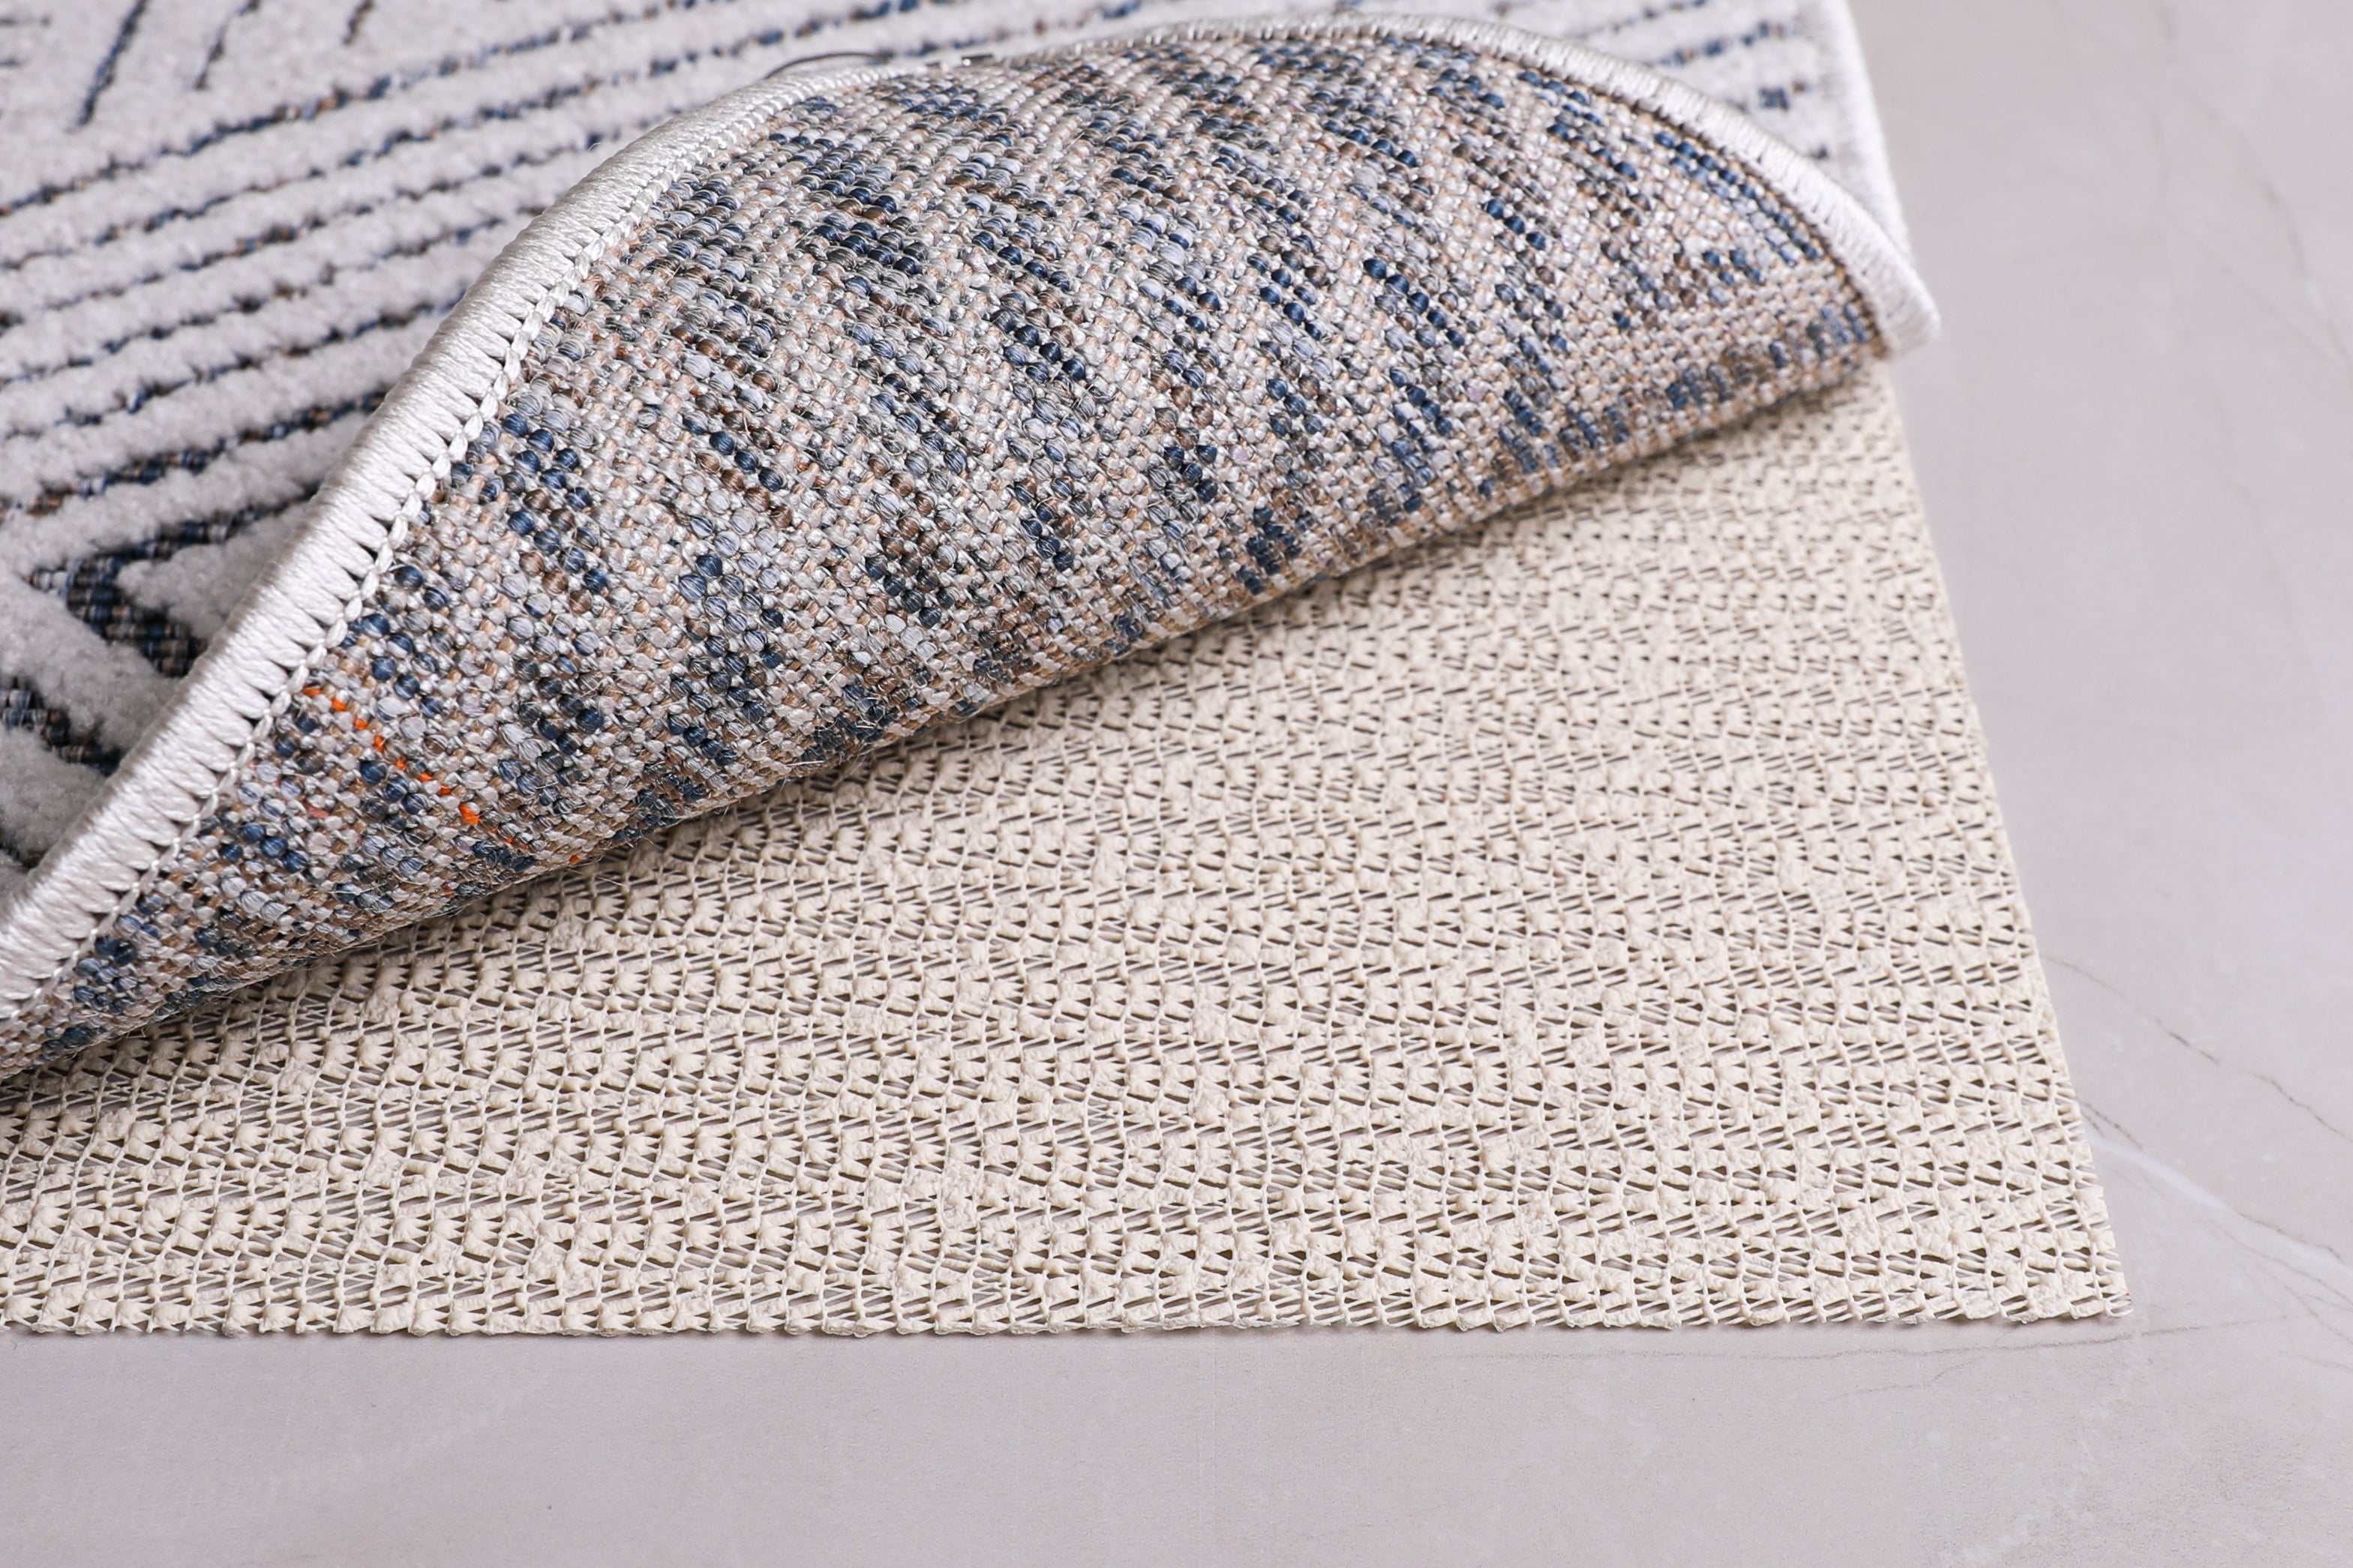 Rubber Anchor Rug Padding - Natural, Non-Allergenic Grip & Comfort